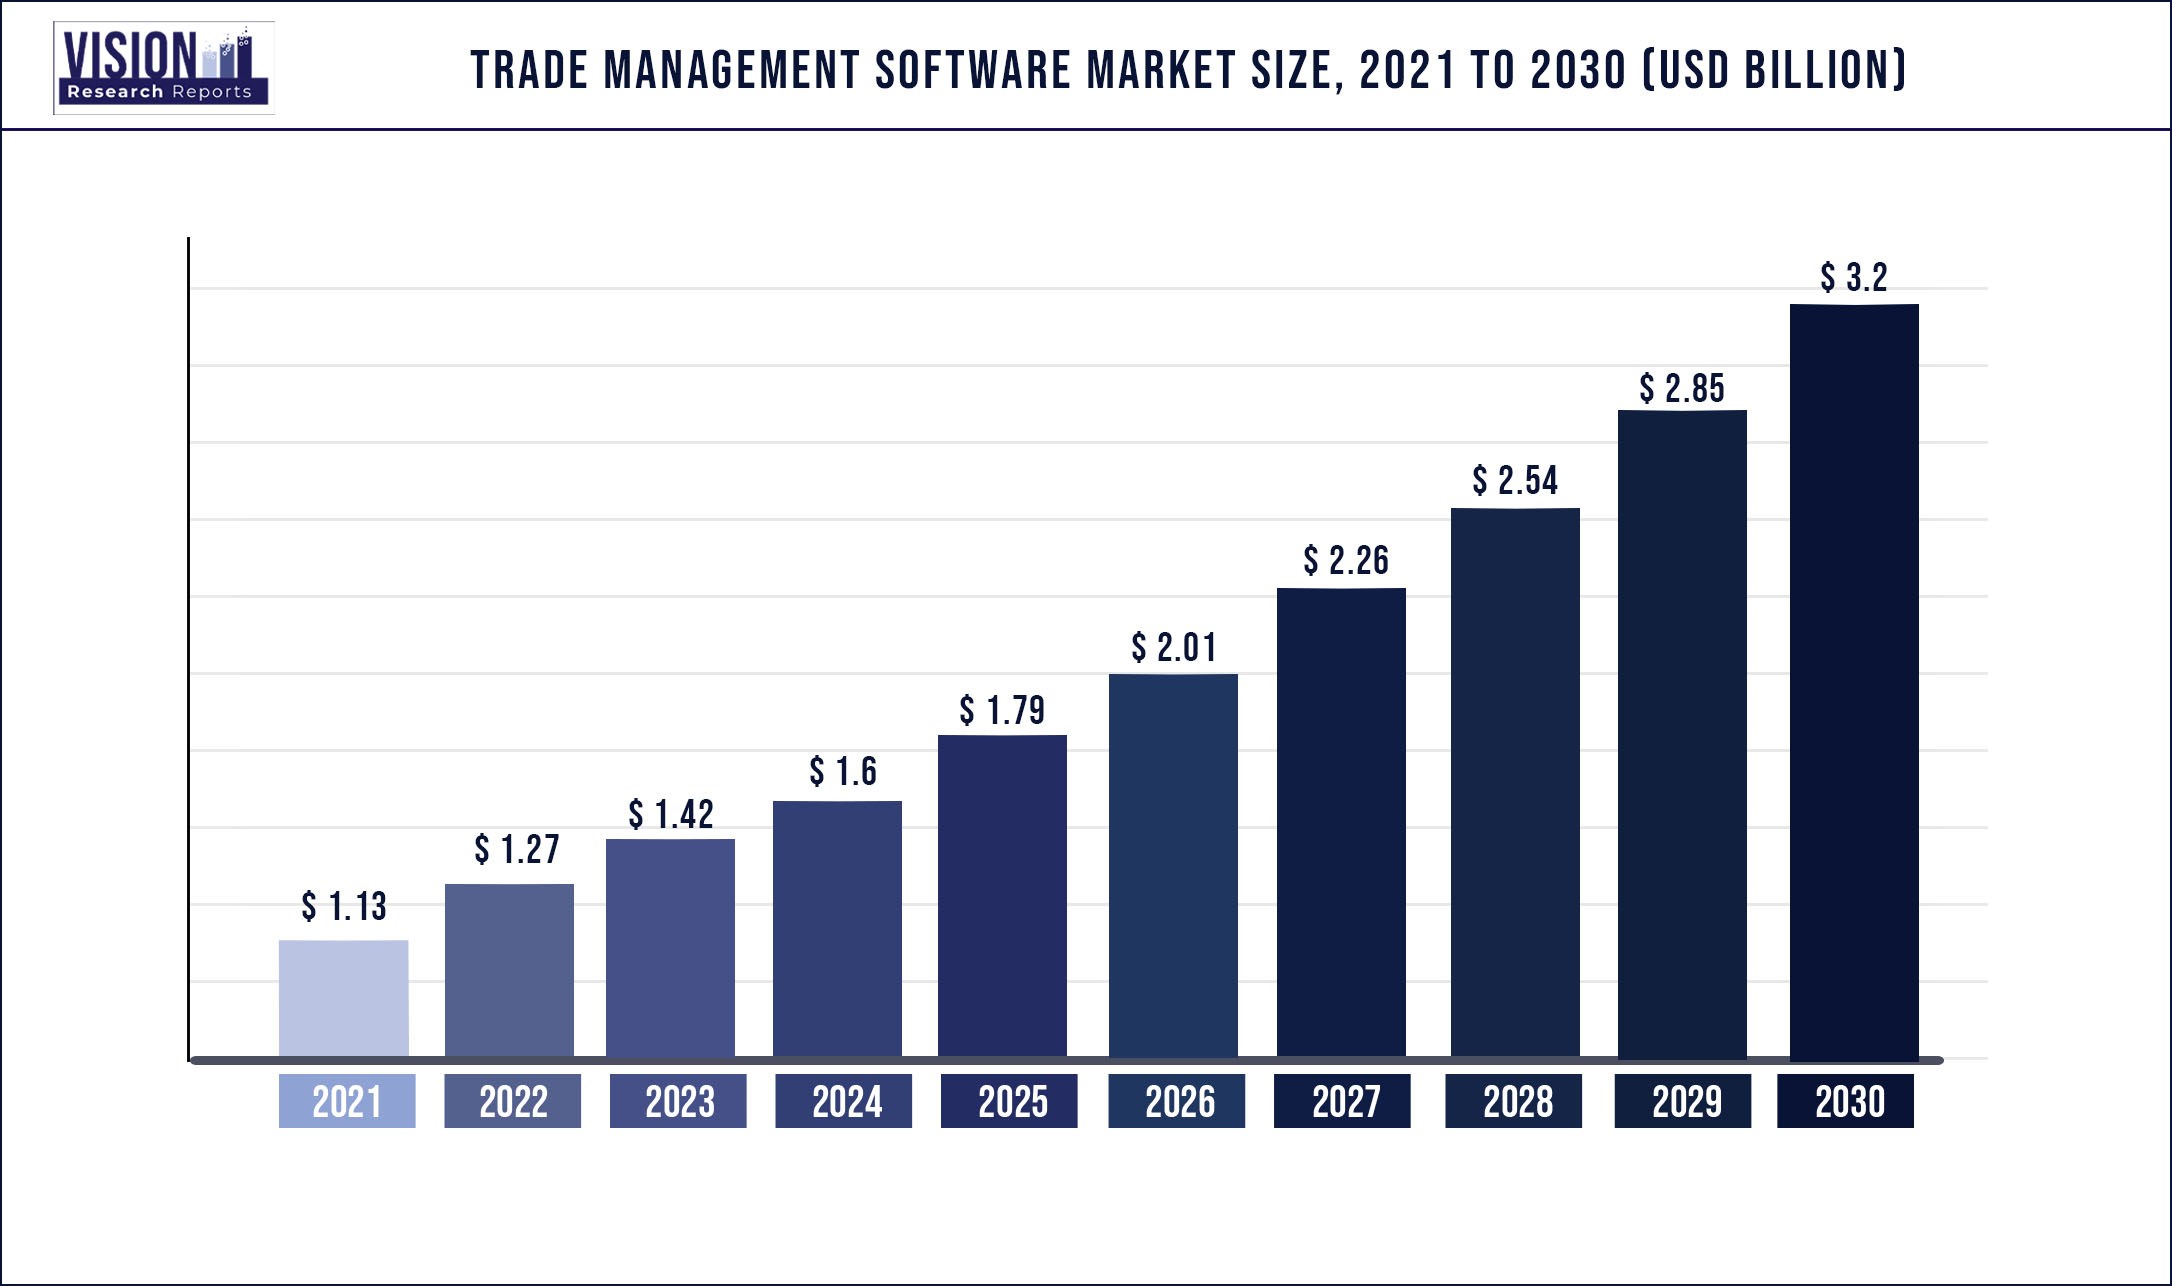 Trade Management Software Market Size 2021 to 2030